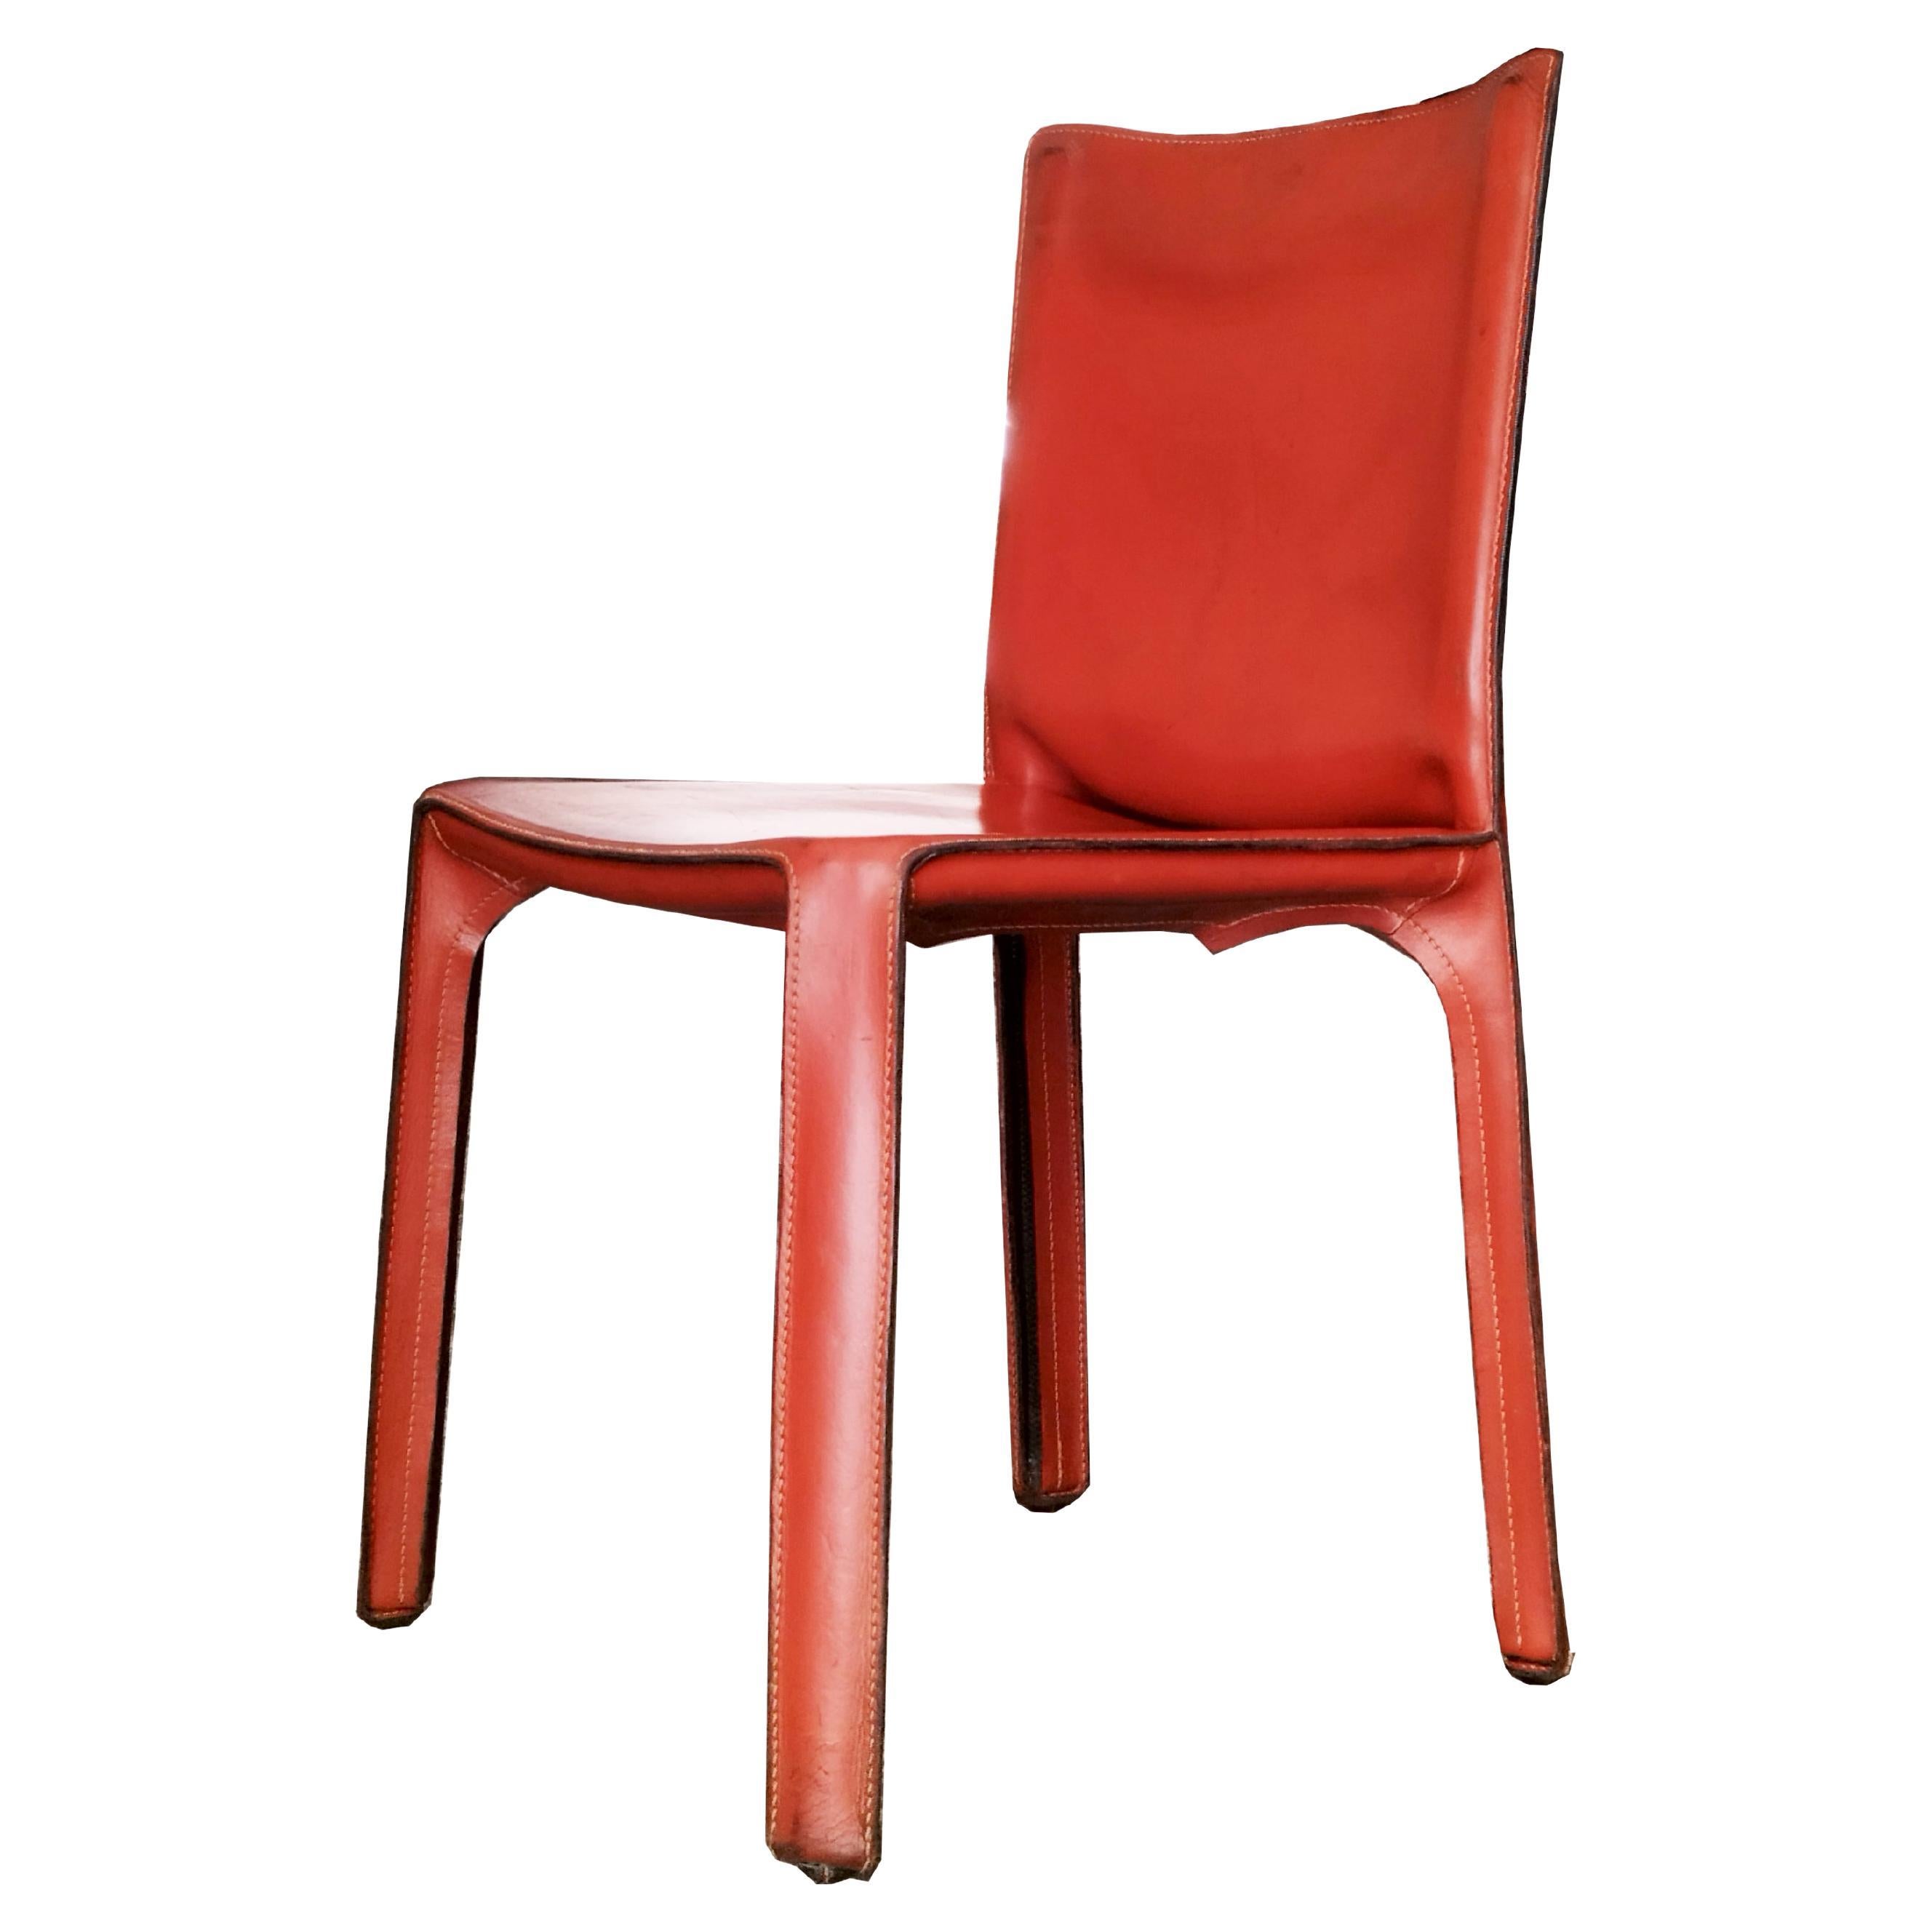 Mario Bellini for Cassina Cab Dining Chair Mod.412, Italy, 1978 For Sale